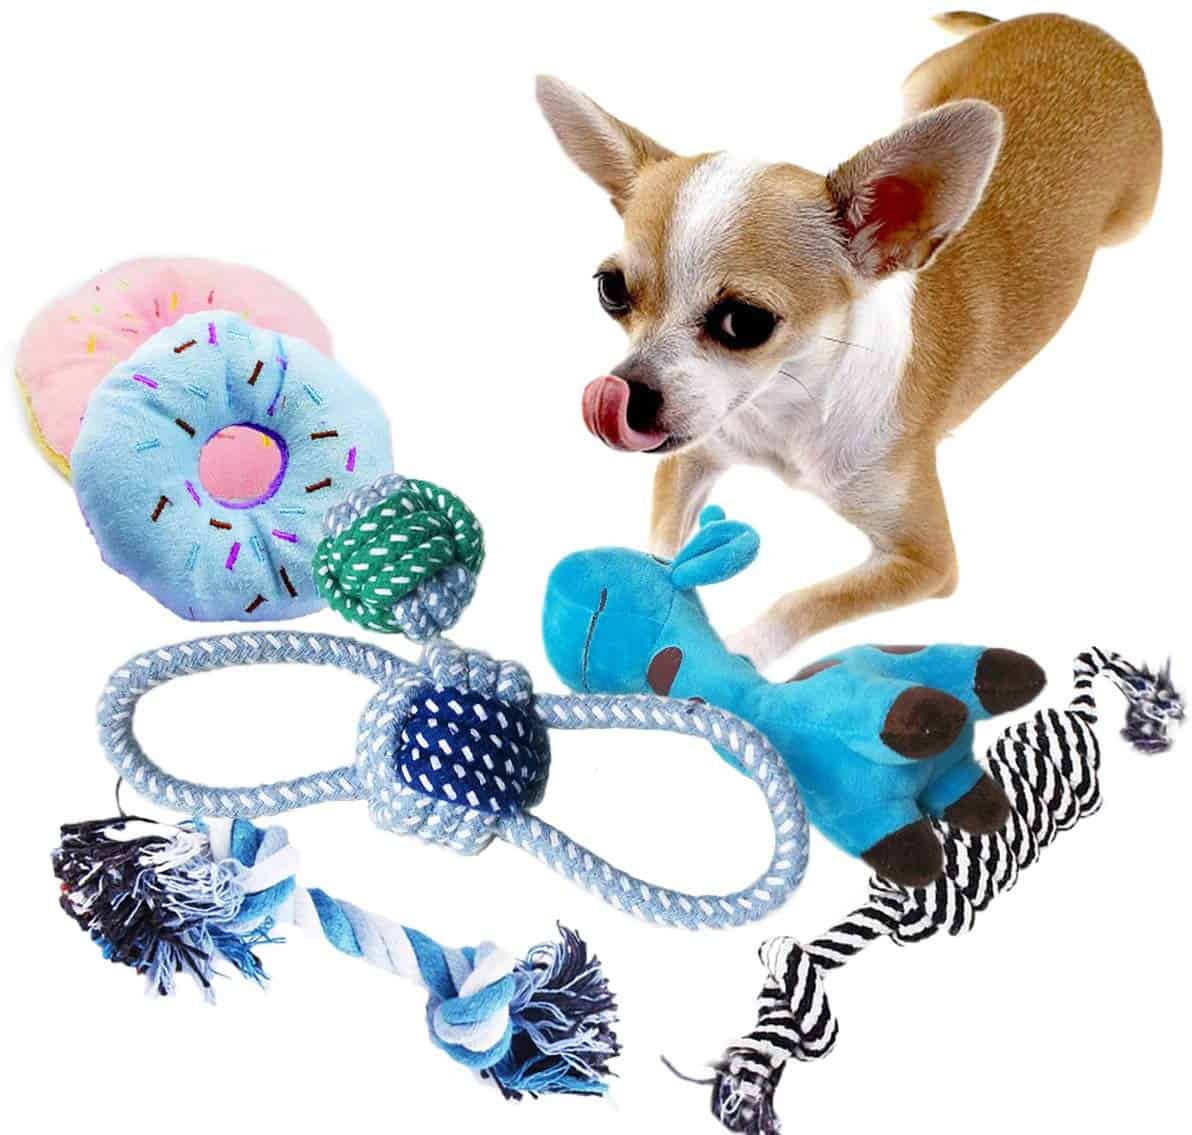 https://www.chihuahuapuppytraining.com/wp-content/uploads/2020/02/Providing-Your-Chihuahua-With-Proper-Toys.jpg